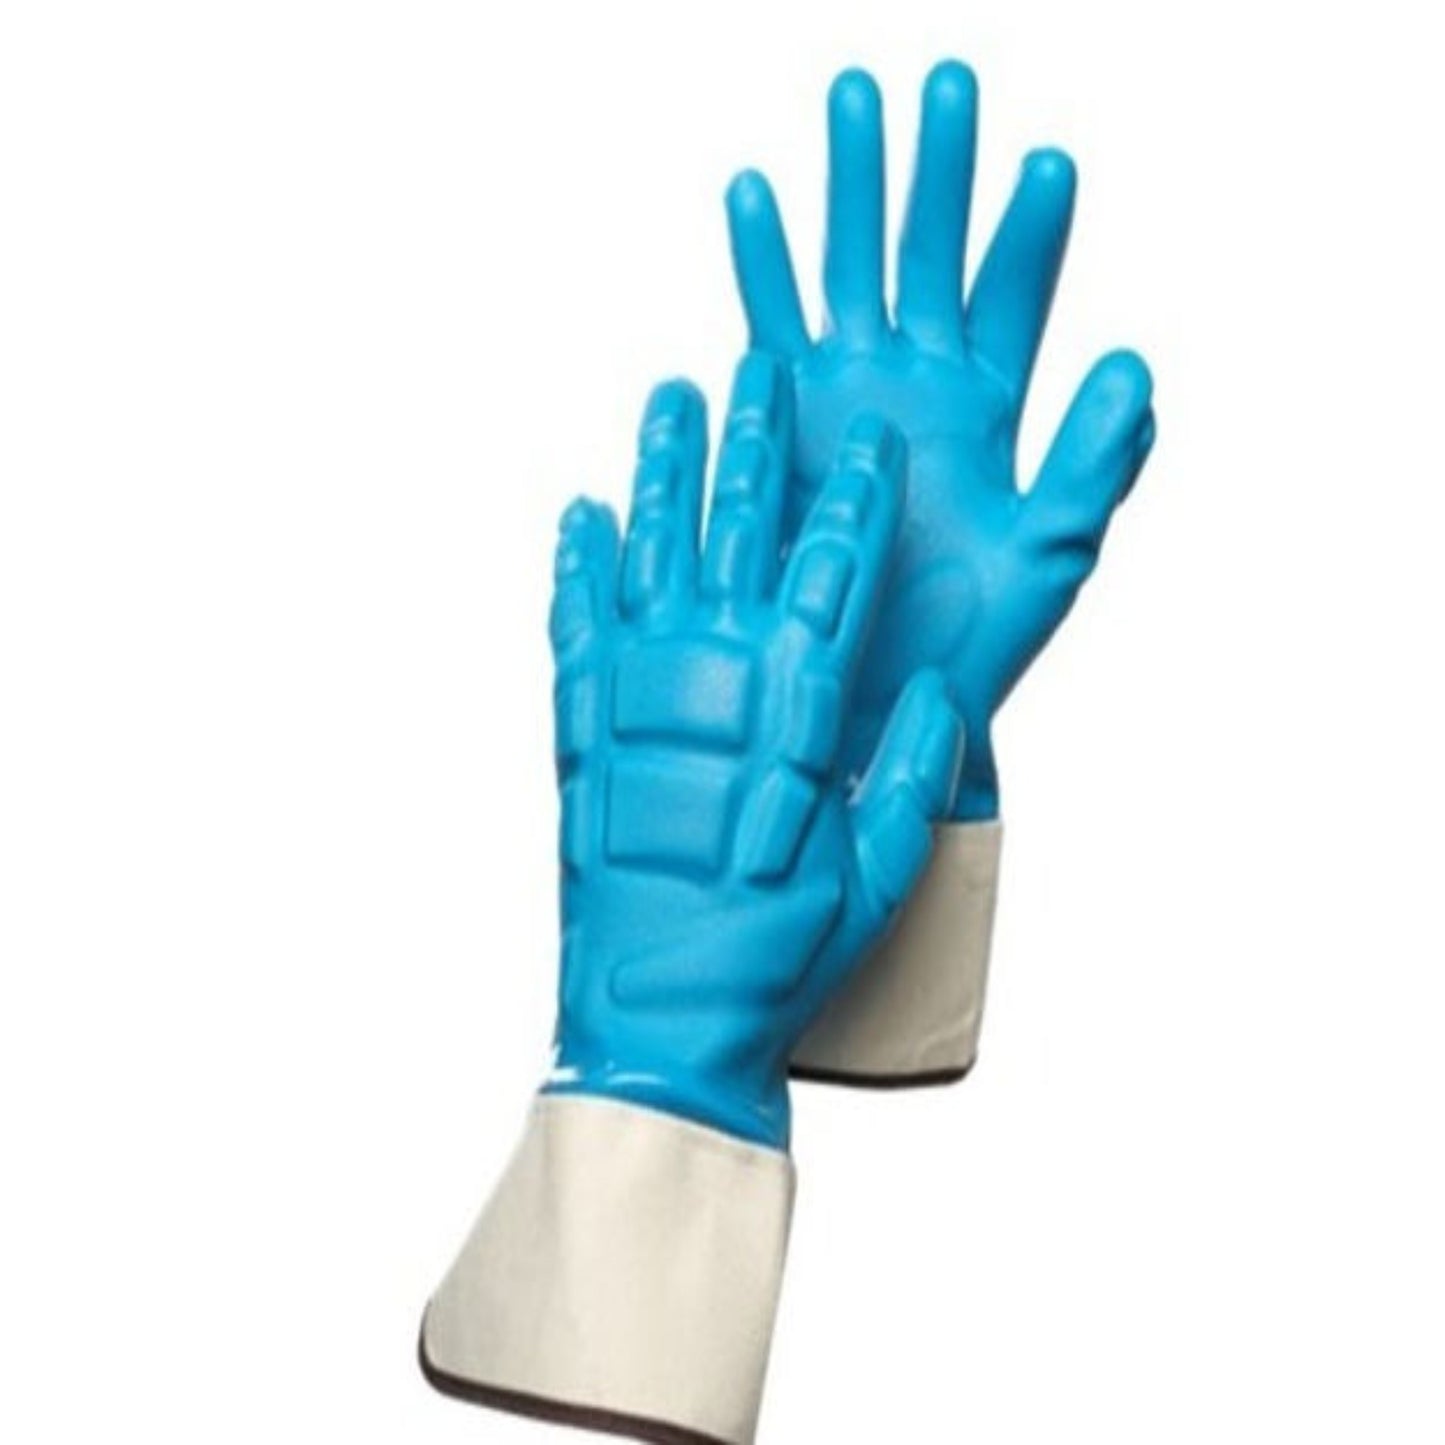 Cut A2 Fully Coated PVC Metacarpal Protection Glove with Gauntlet Cuff